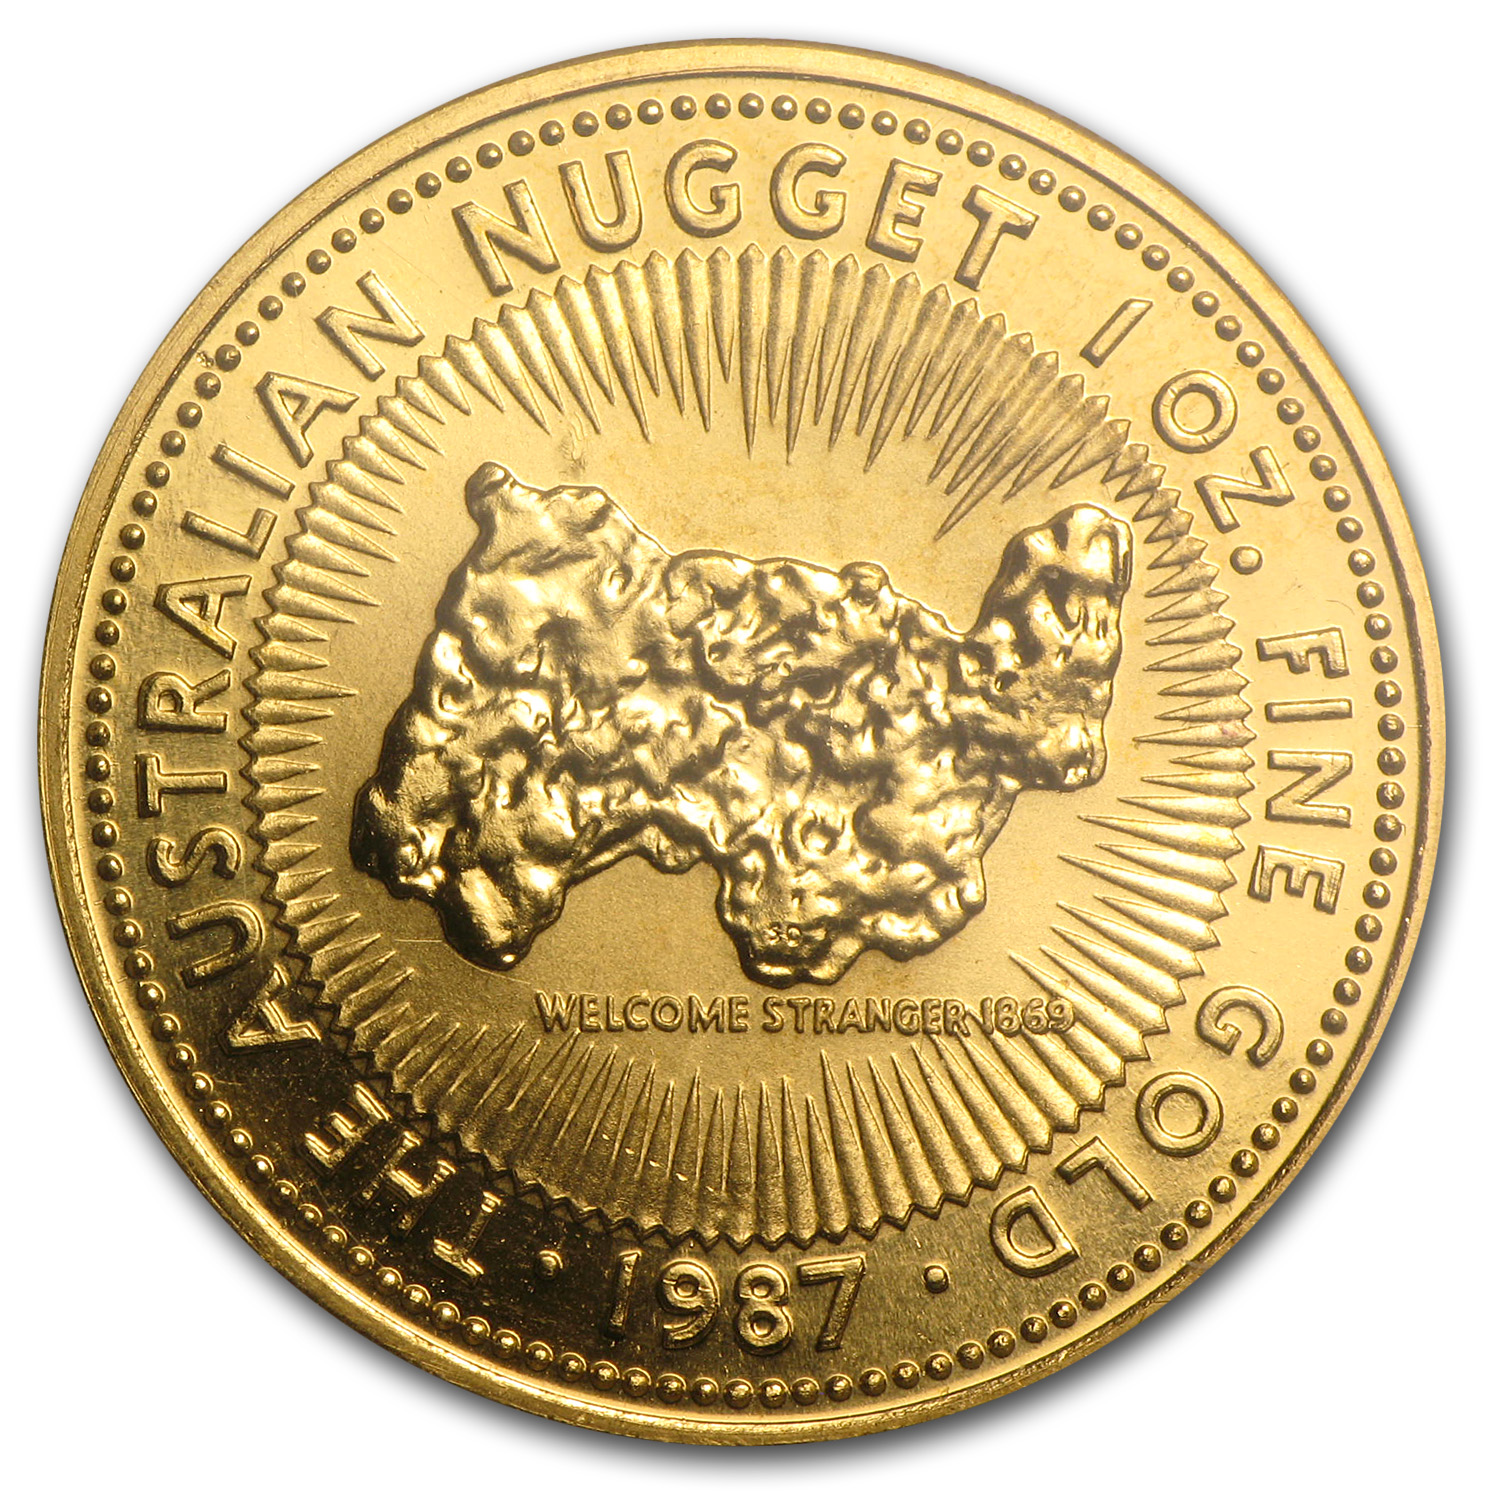 1987 Gold Nugget bullion coin - reverse side